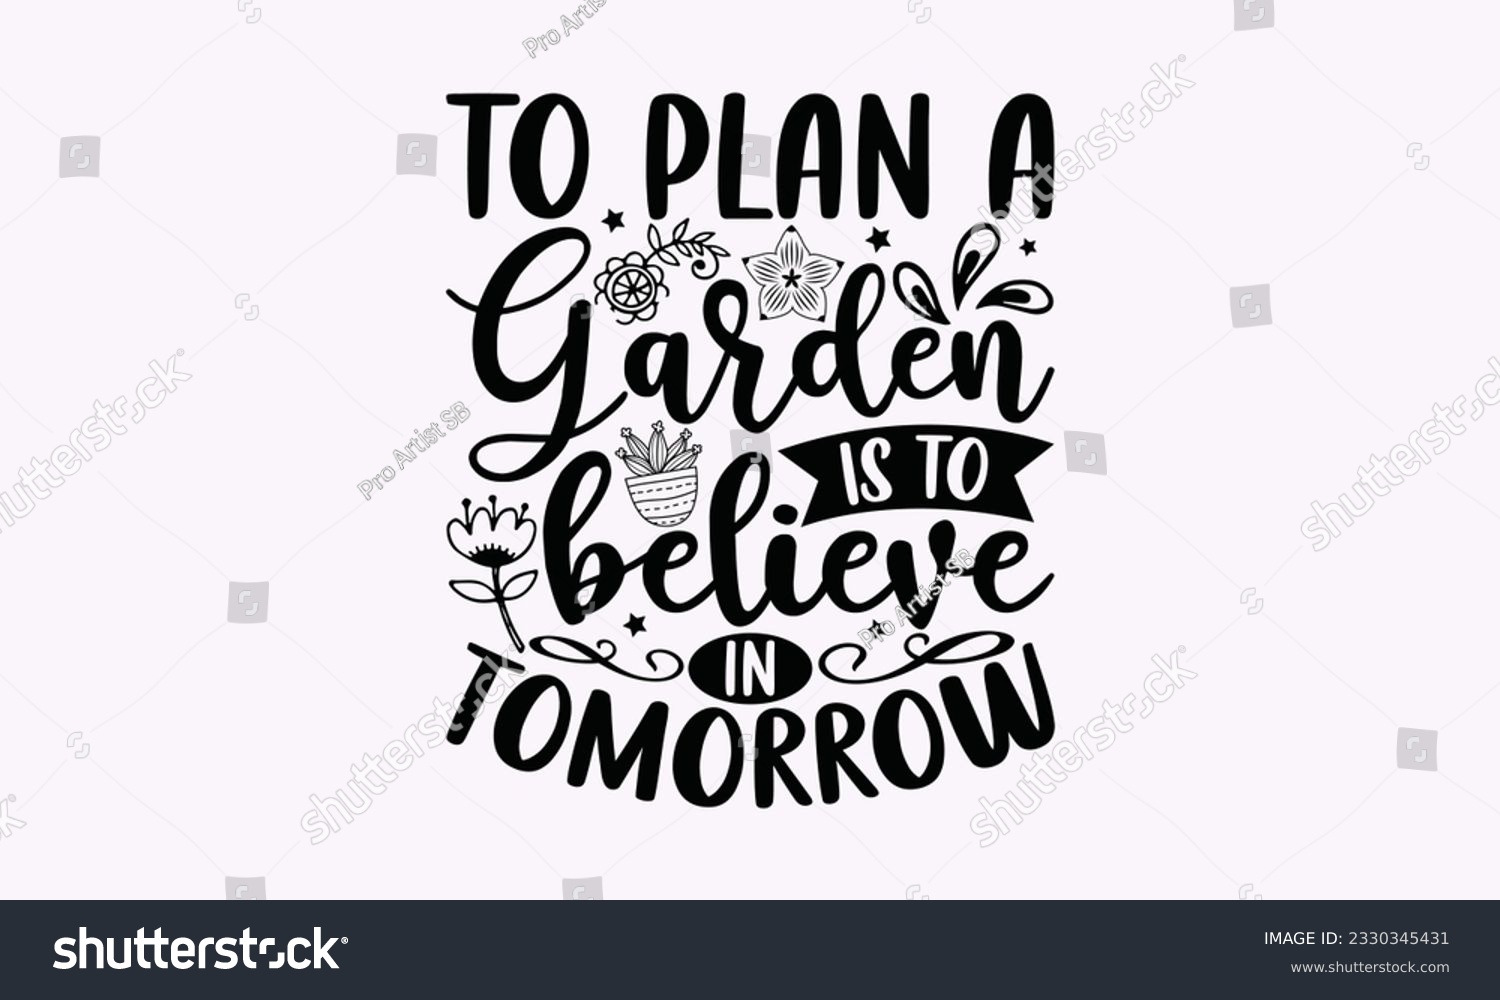 SVG of To plan a garden is to believe in tomorrow - Gardening SVG Design, plant Quotes, Hand drawn lettering phrase, Isolated on white background. svg